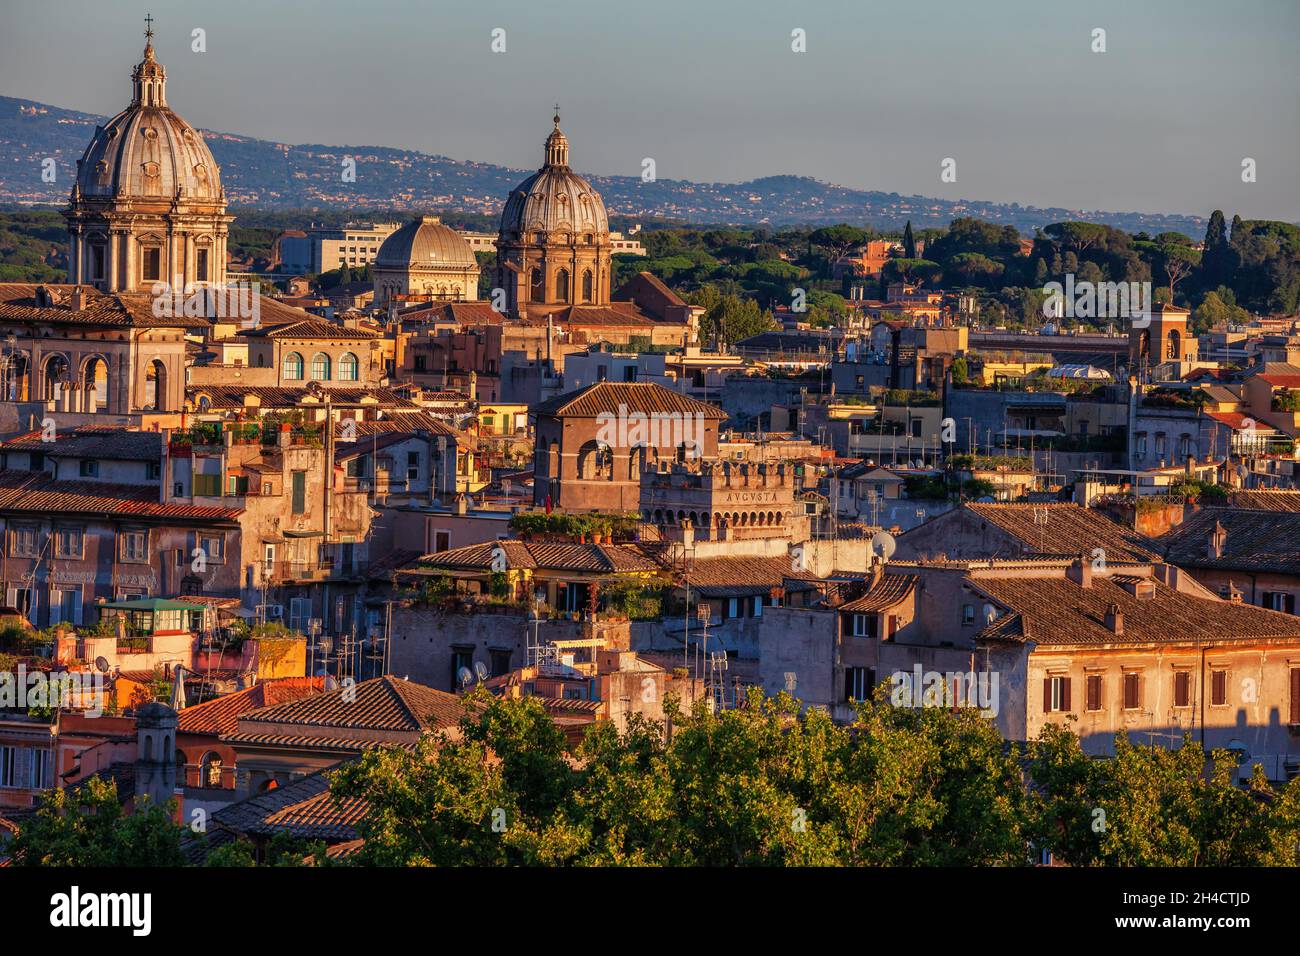 Sunset in city of Rome in Italy. Cityscape with traditional hillside houses and church domes. Stock Photo